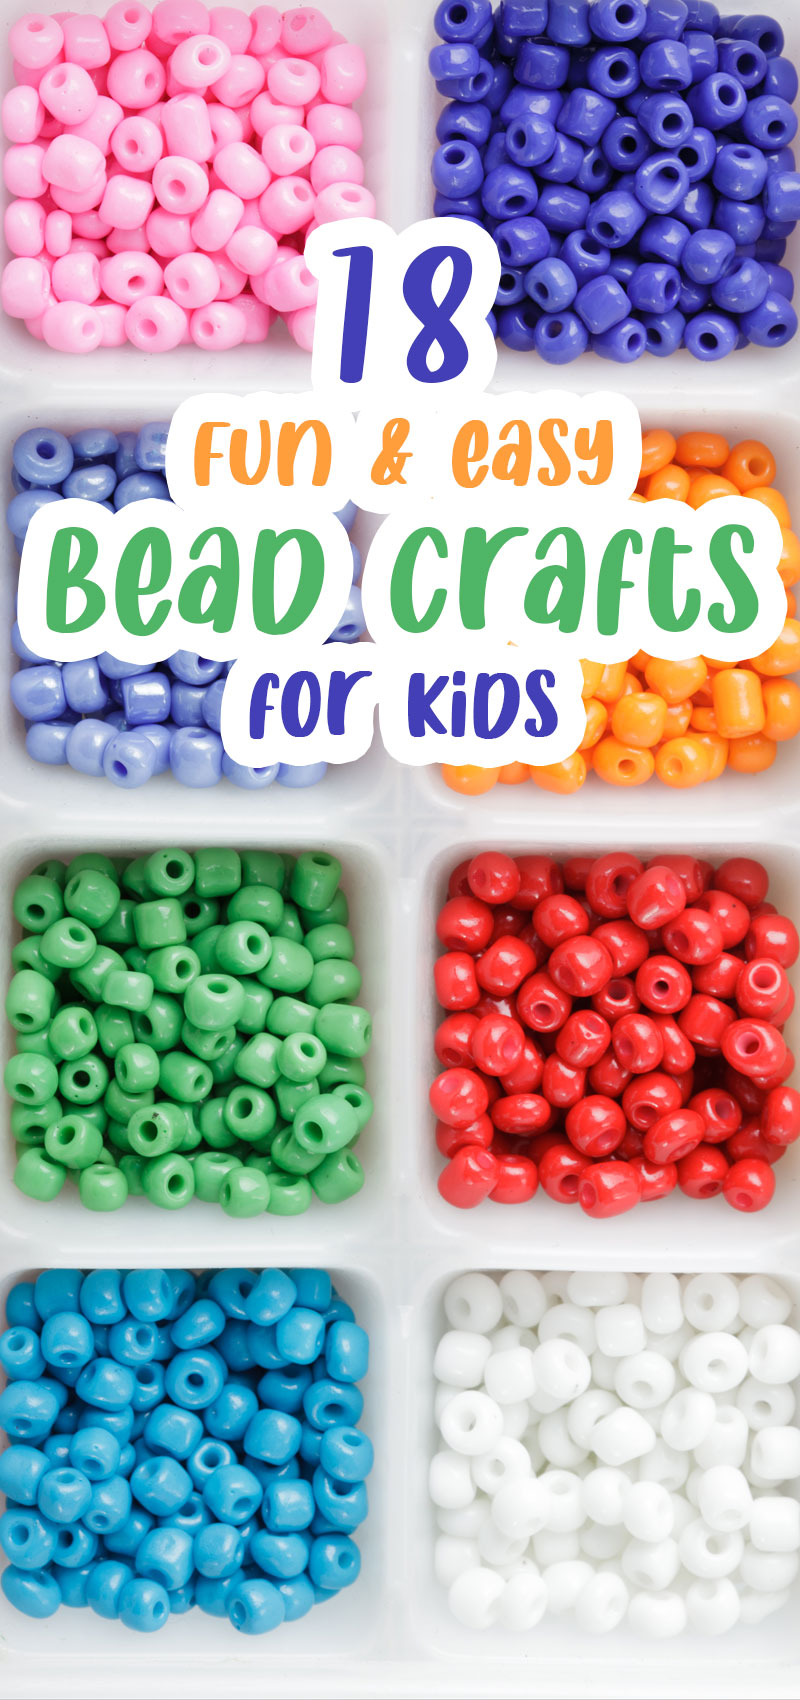 bead crafts for kids